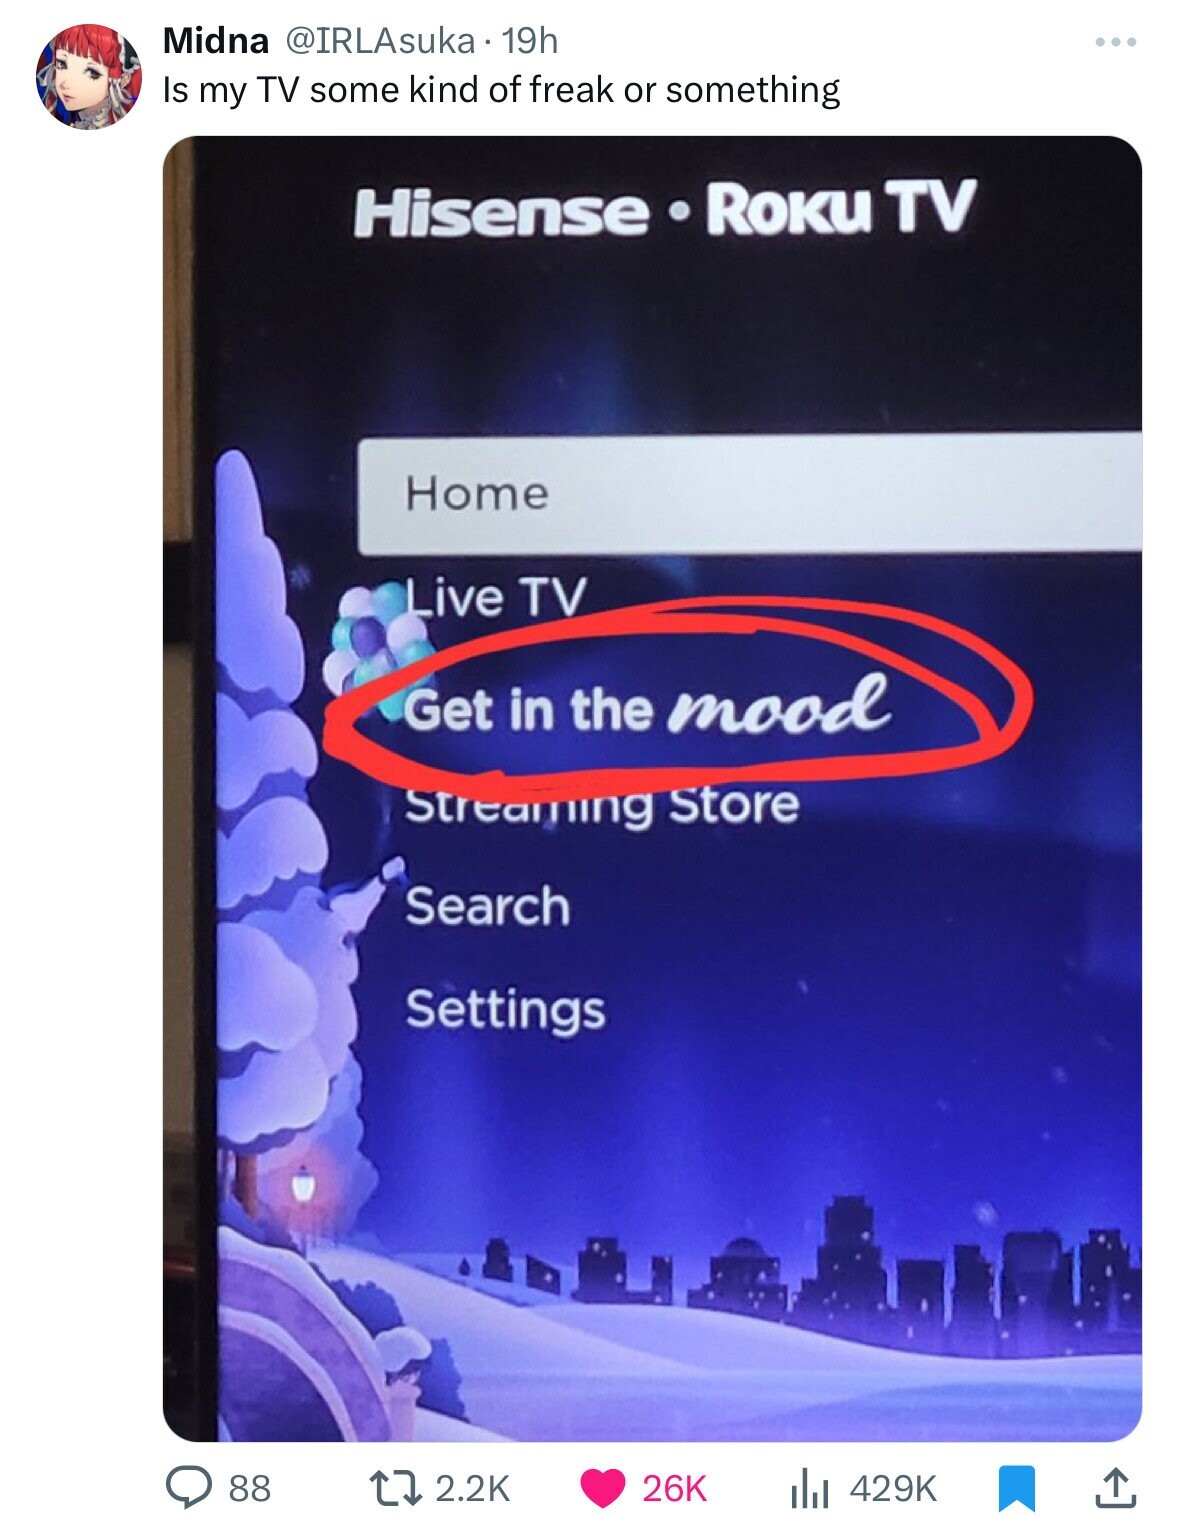 multimedia - Midna 19h Is my Tv some kind of freak or something 88 Hisense Roku Tv Home Live Tv Get in the mood Streaming Store Search Settings 26K il